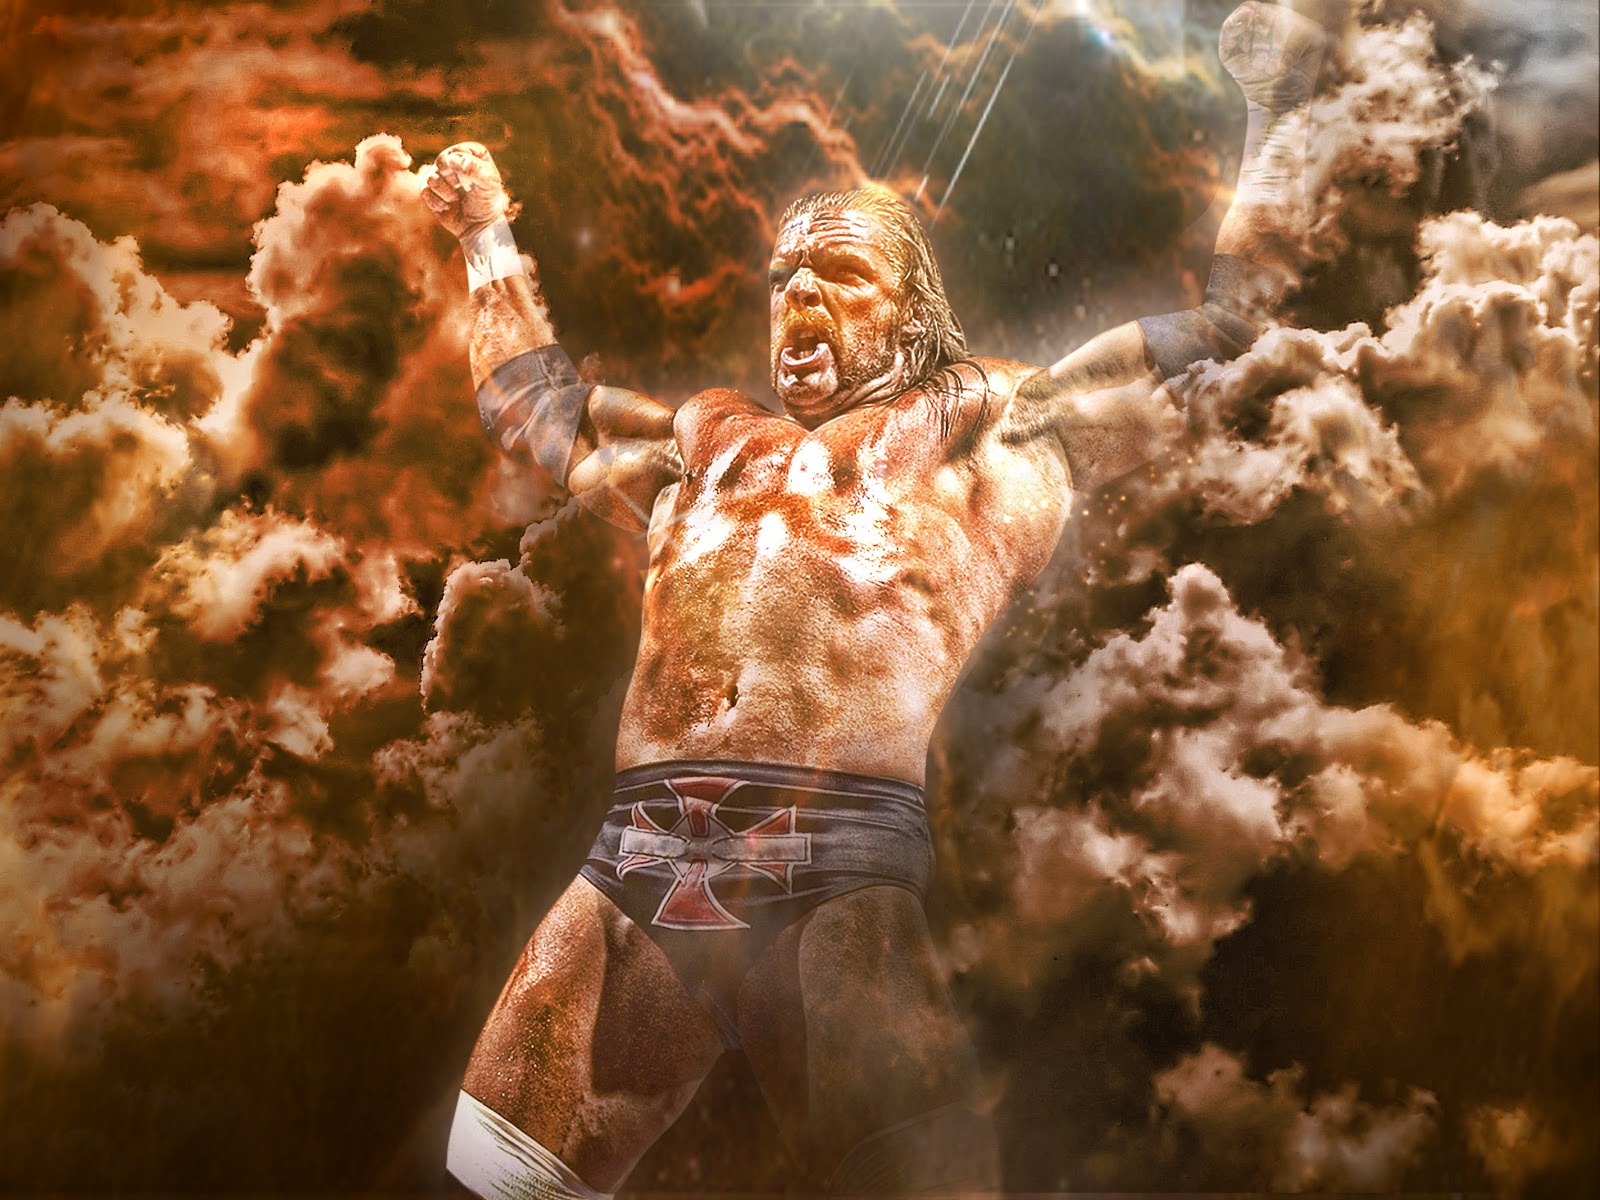 Triple H HD Wallpaper For Your Desktop Background Or